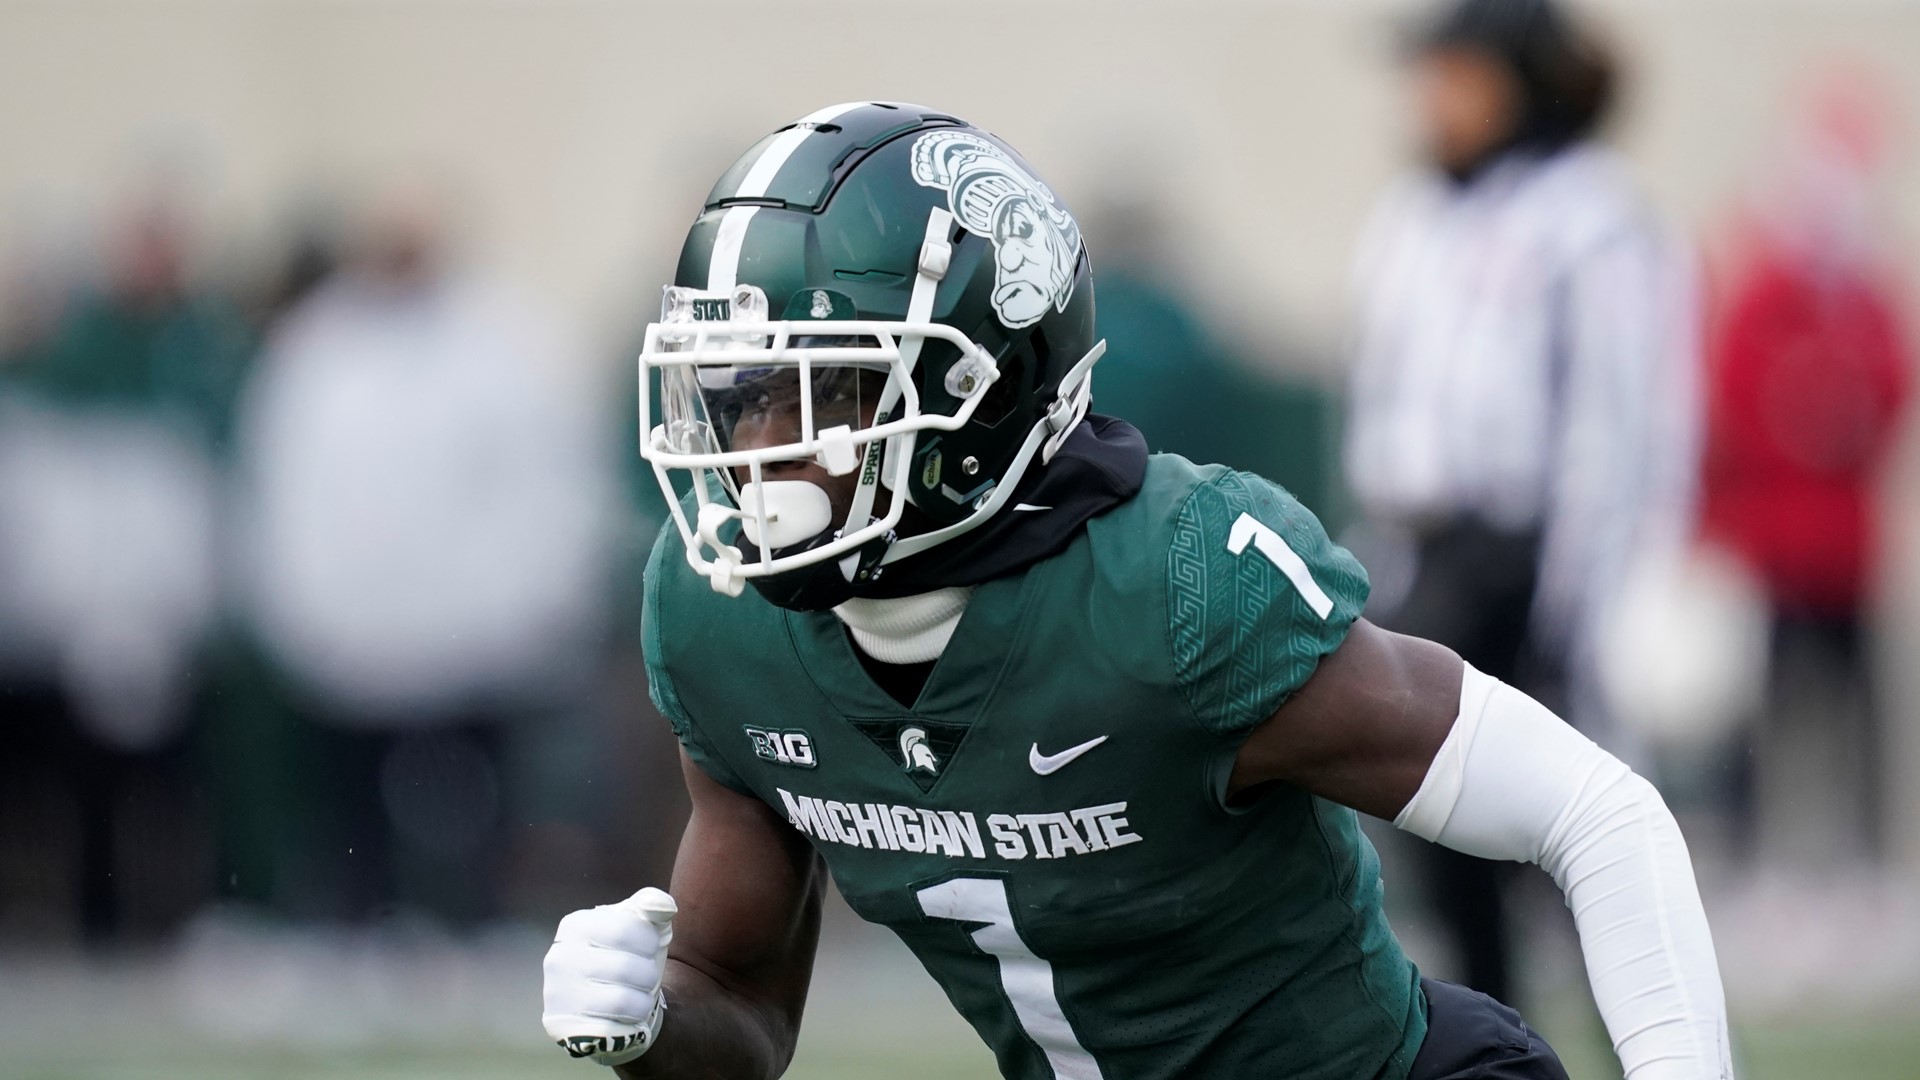 Michigan State wide receiver Jayden Reed did not wait long to announce his future plans.